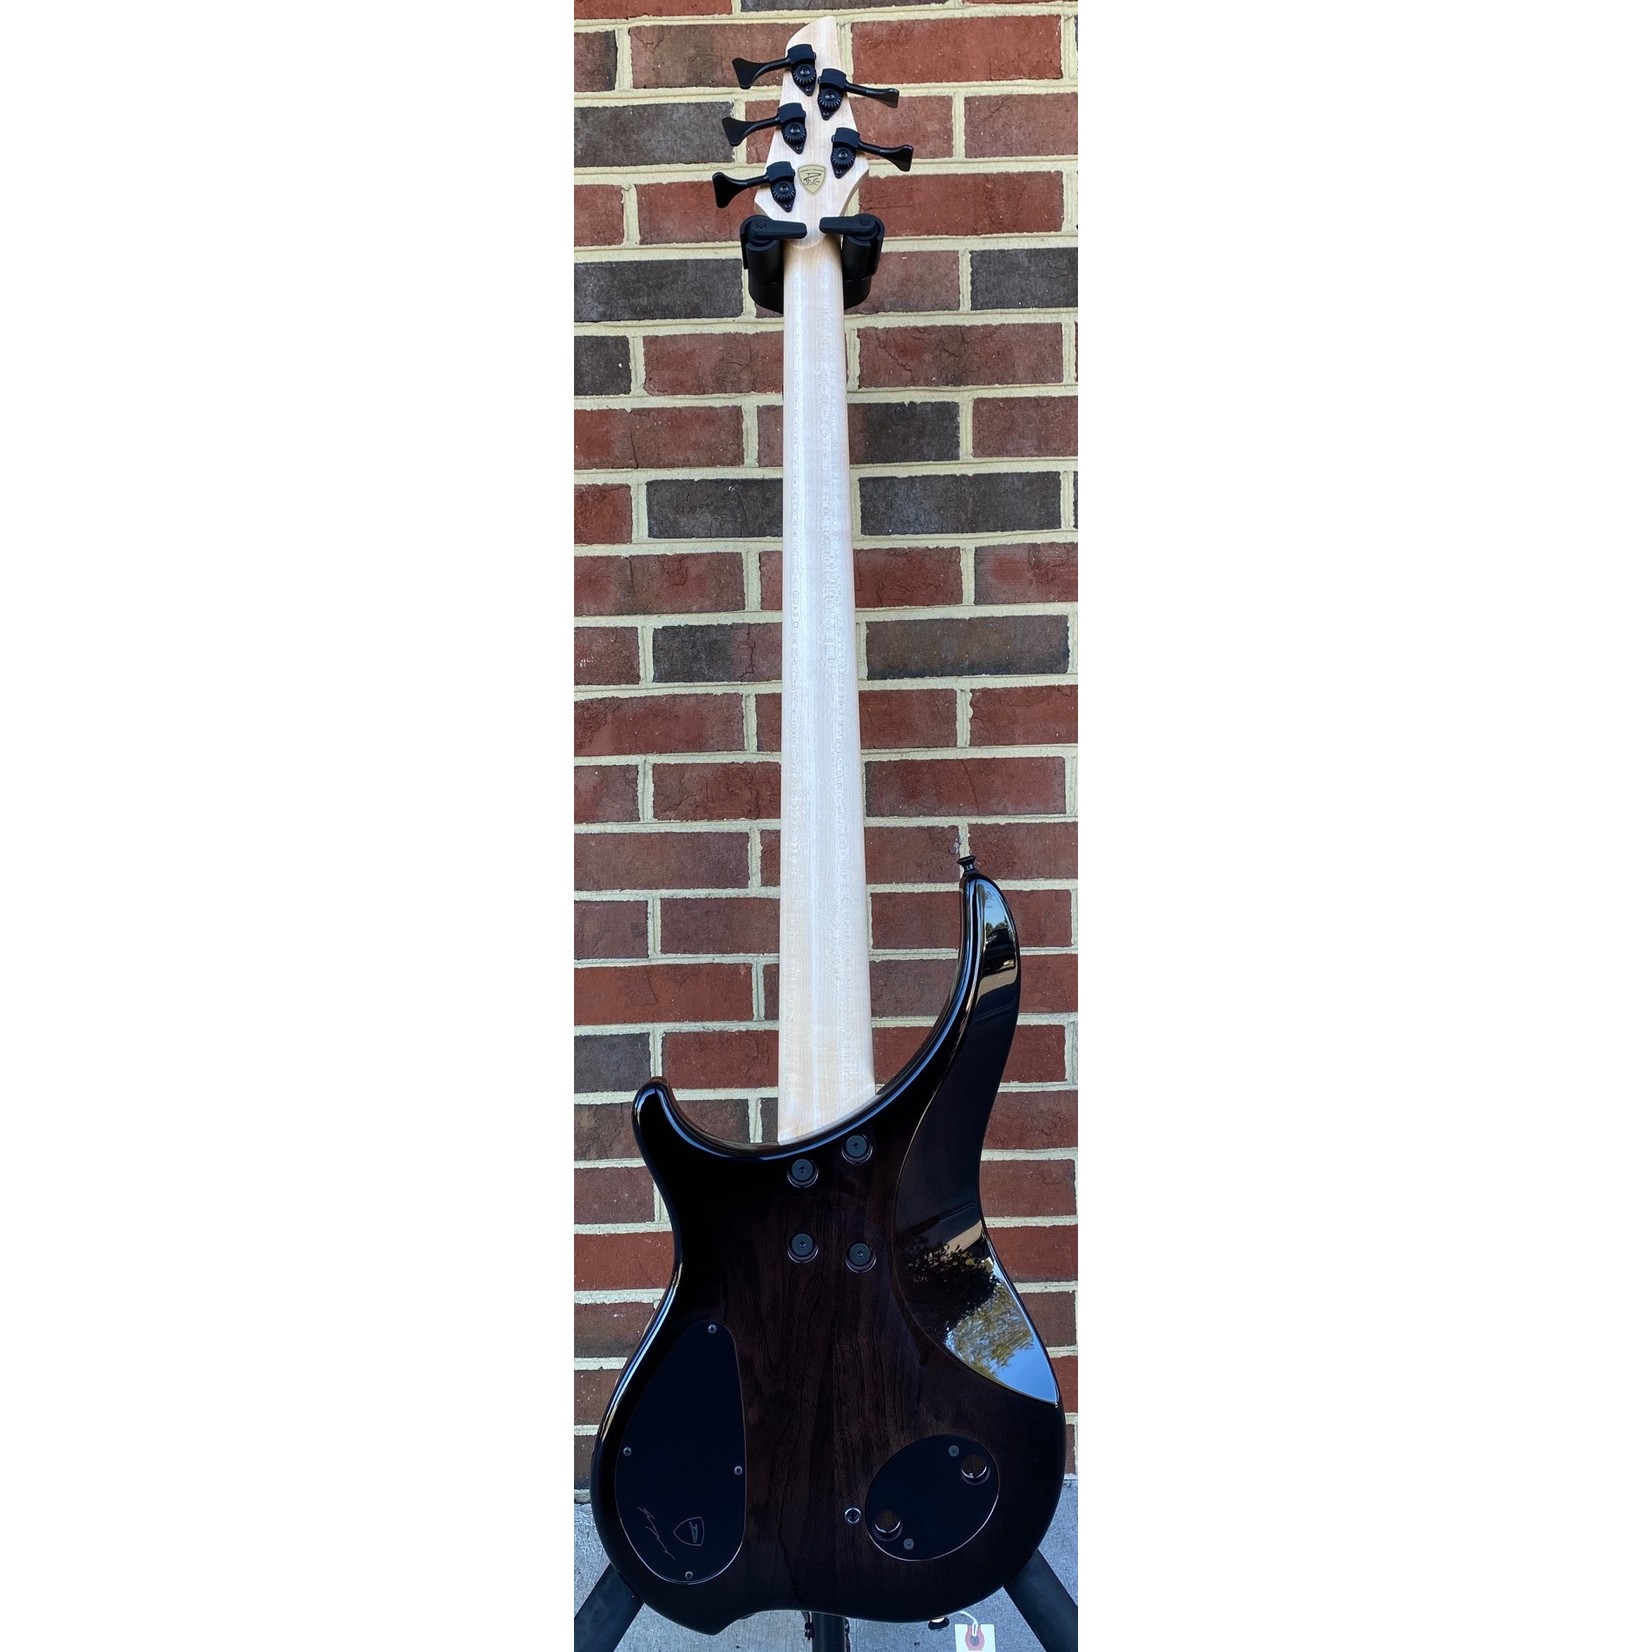 Dingwall Dingwall ABII Custom 5, Afterburner II 5-String, Ziricote X-Top, Flamed Maple Contrast Layer, Trans Black Burst, Semi-Hollow, 3x Pickups, Glockenklang Preamp w/ Toggles, Maple Neck, Wenge Fretboard, Ghost Speedo Bars Inlay, Blue Luminlay Side Markers, Din